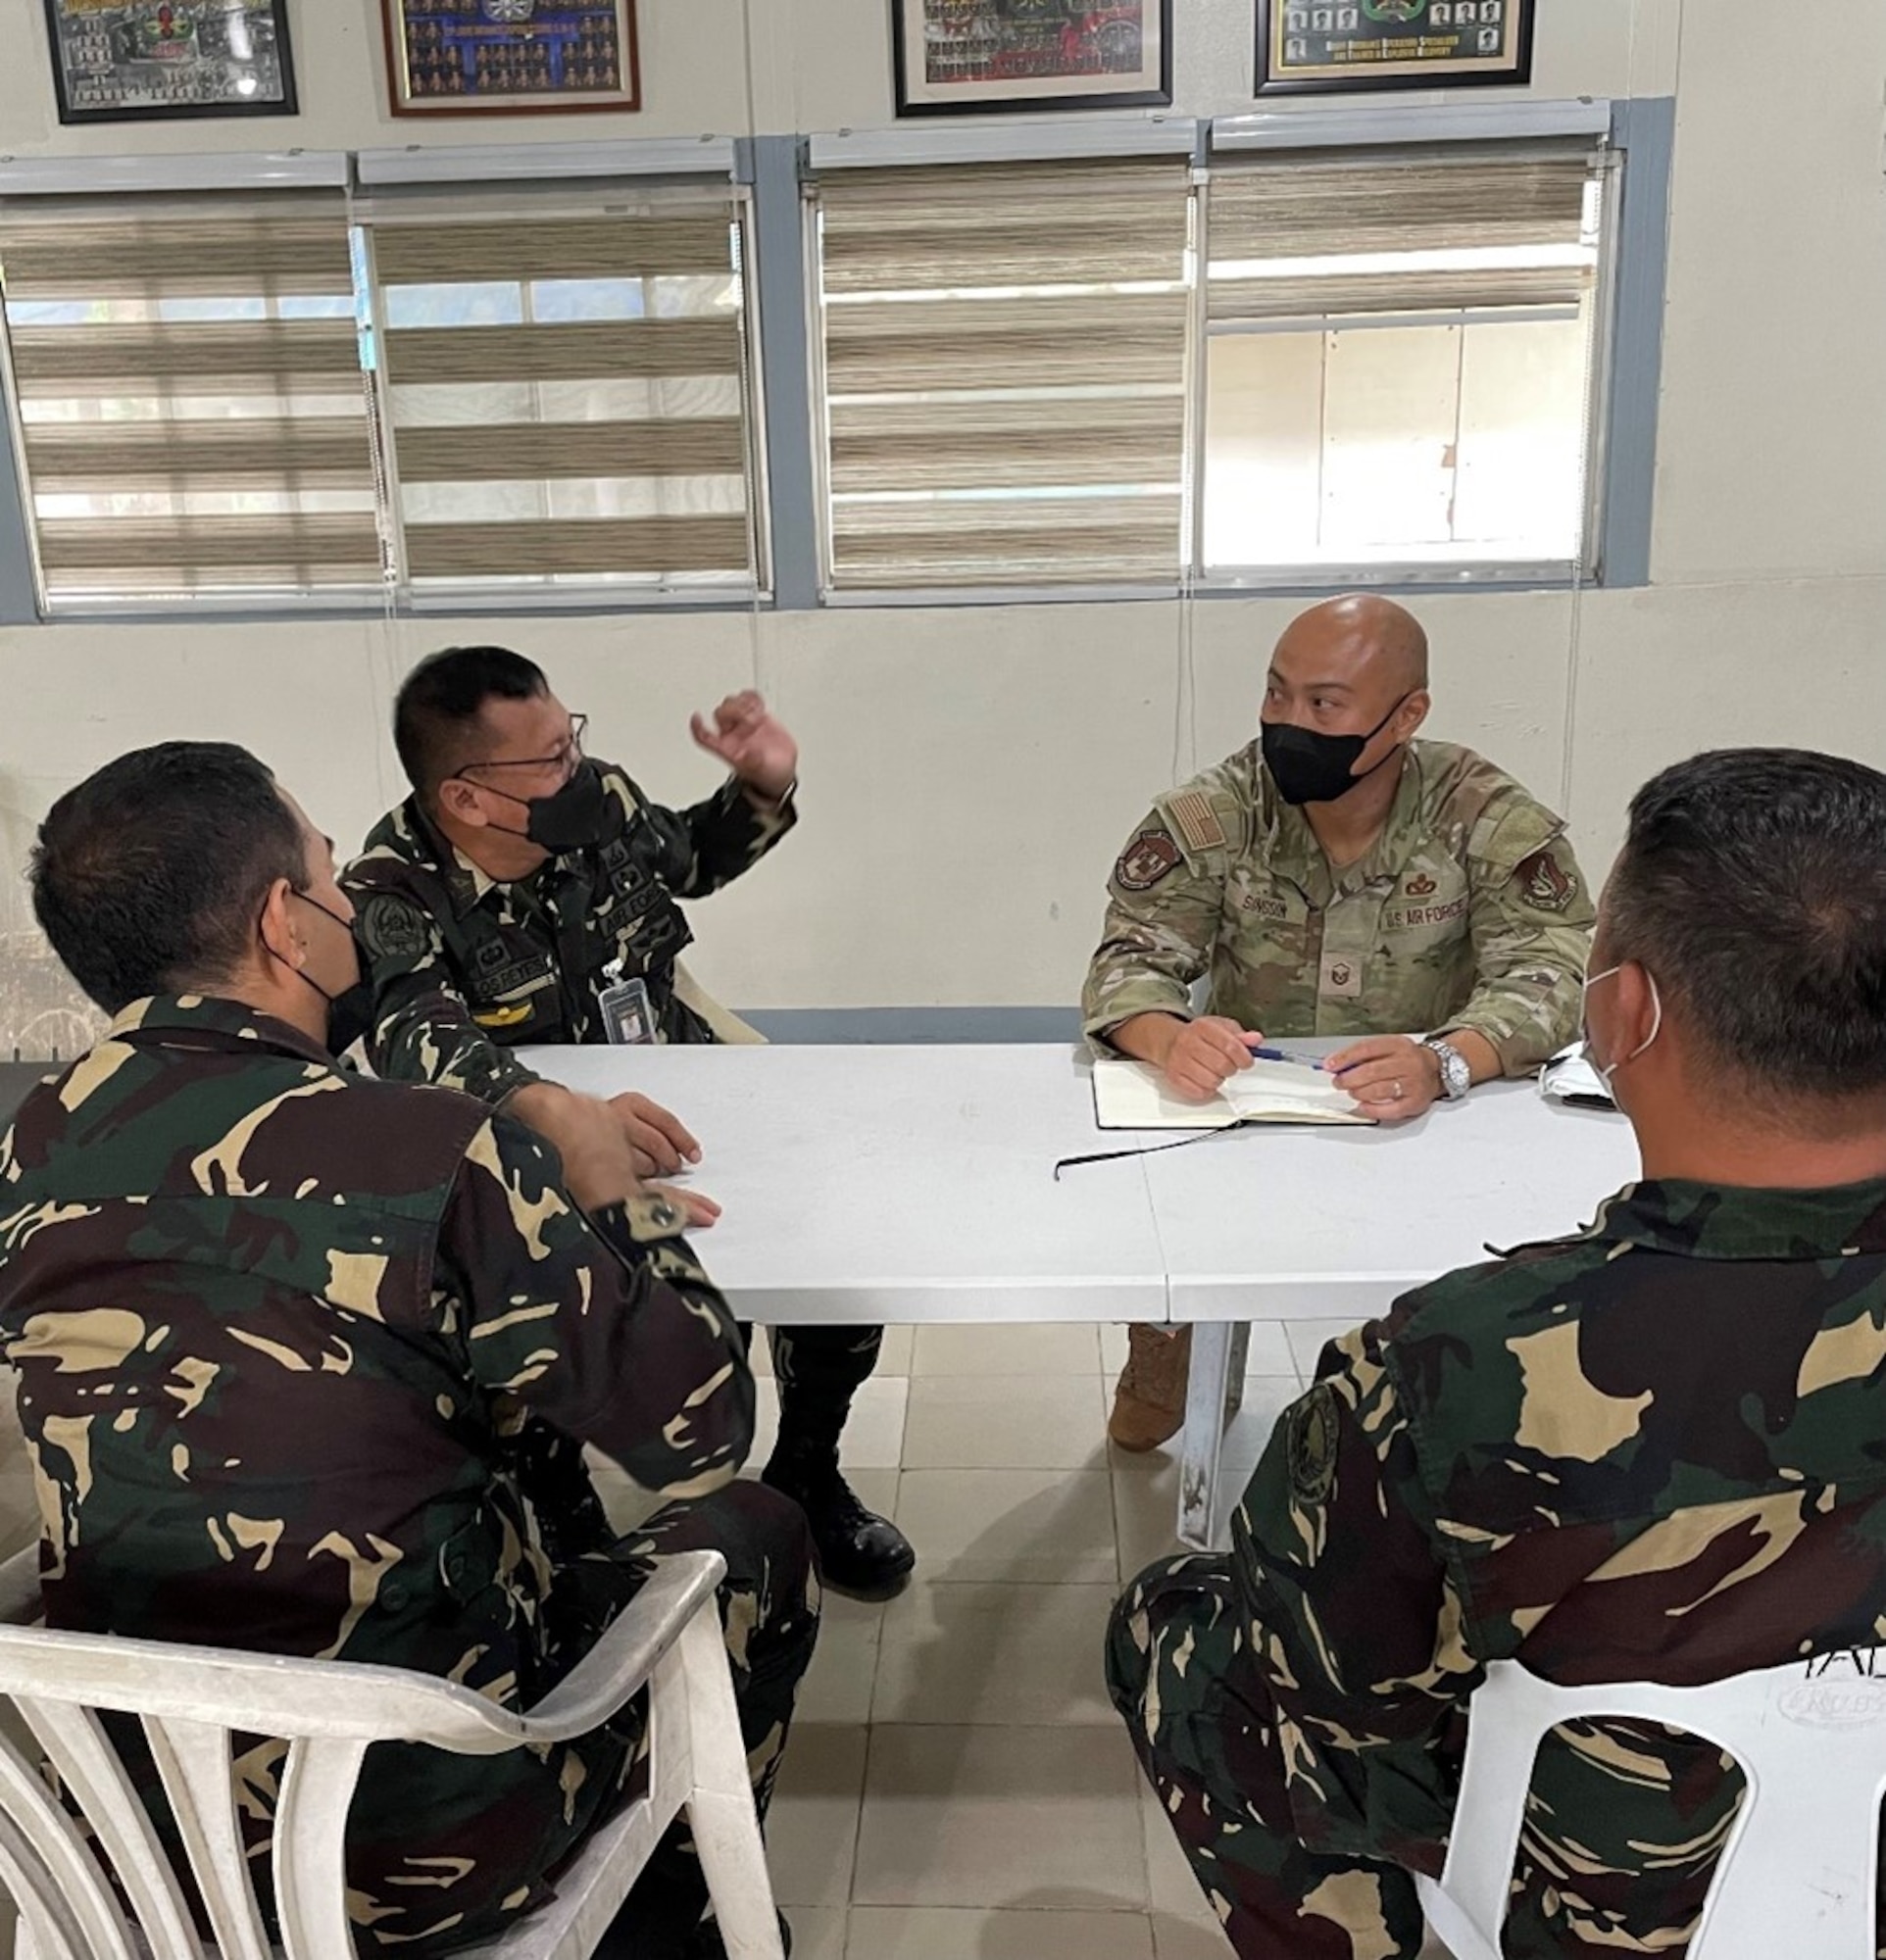 Tagalog LEAP Scholar Master Sgt. Patrick Singson represented PACAF Civil Engineers as he utilized his native language during a planning conference of the 38th iteration of Balikatan Exercise with the Philippine Air Force counterparts. (Courtesy photo)